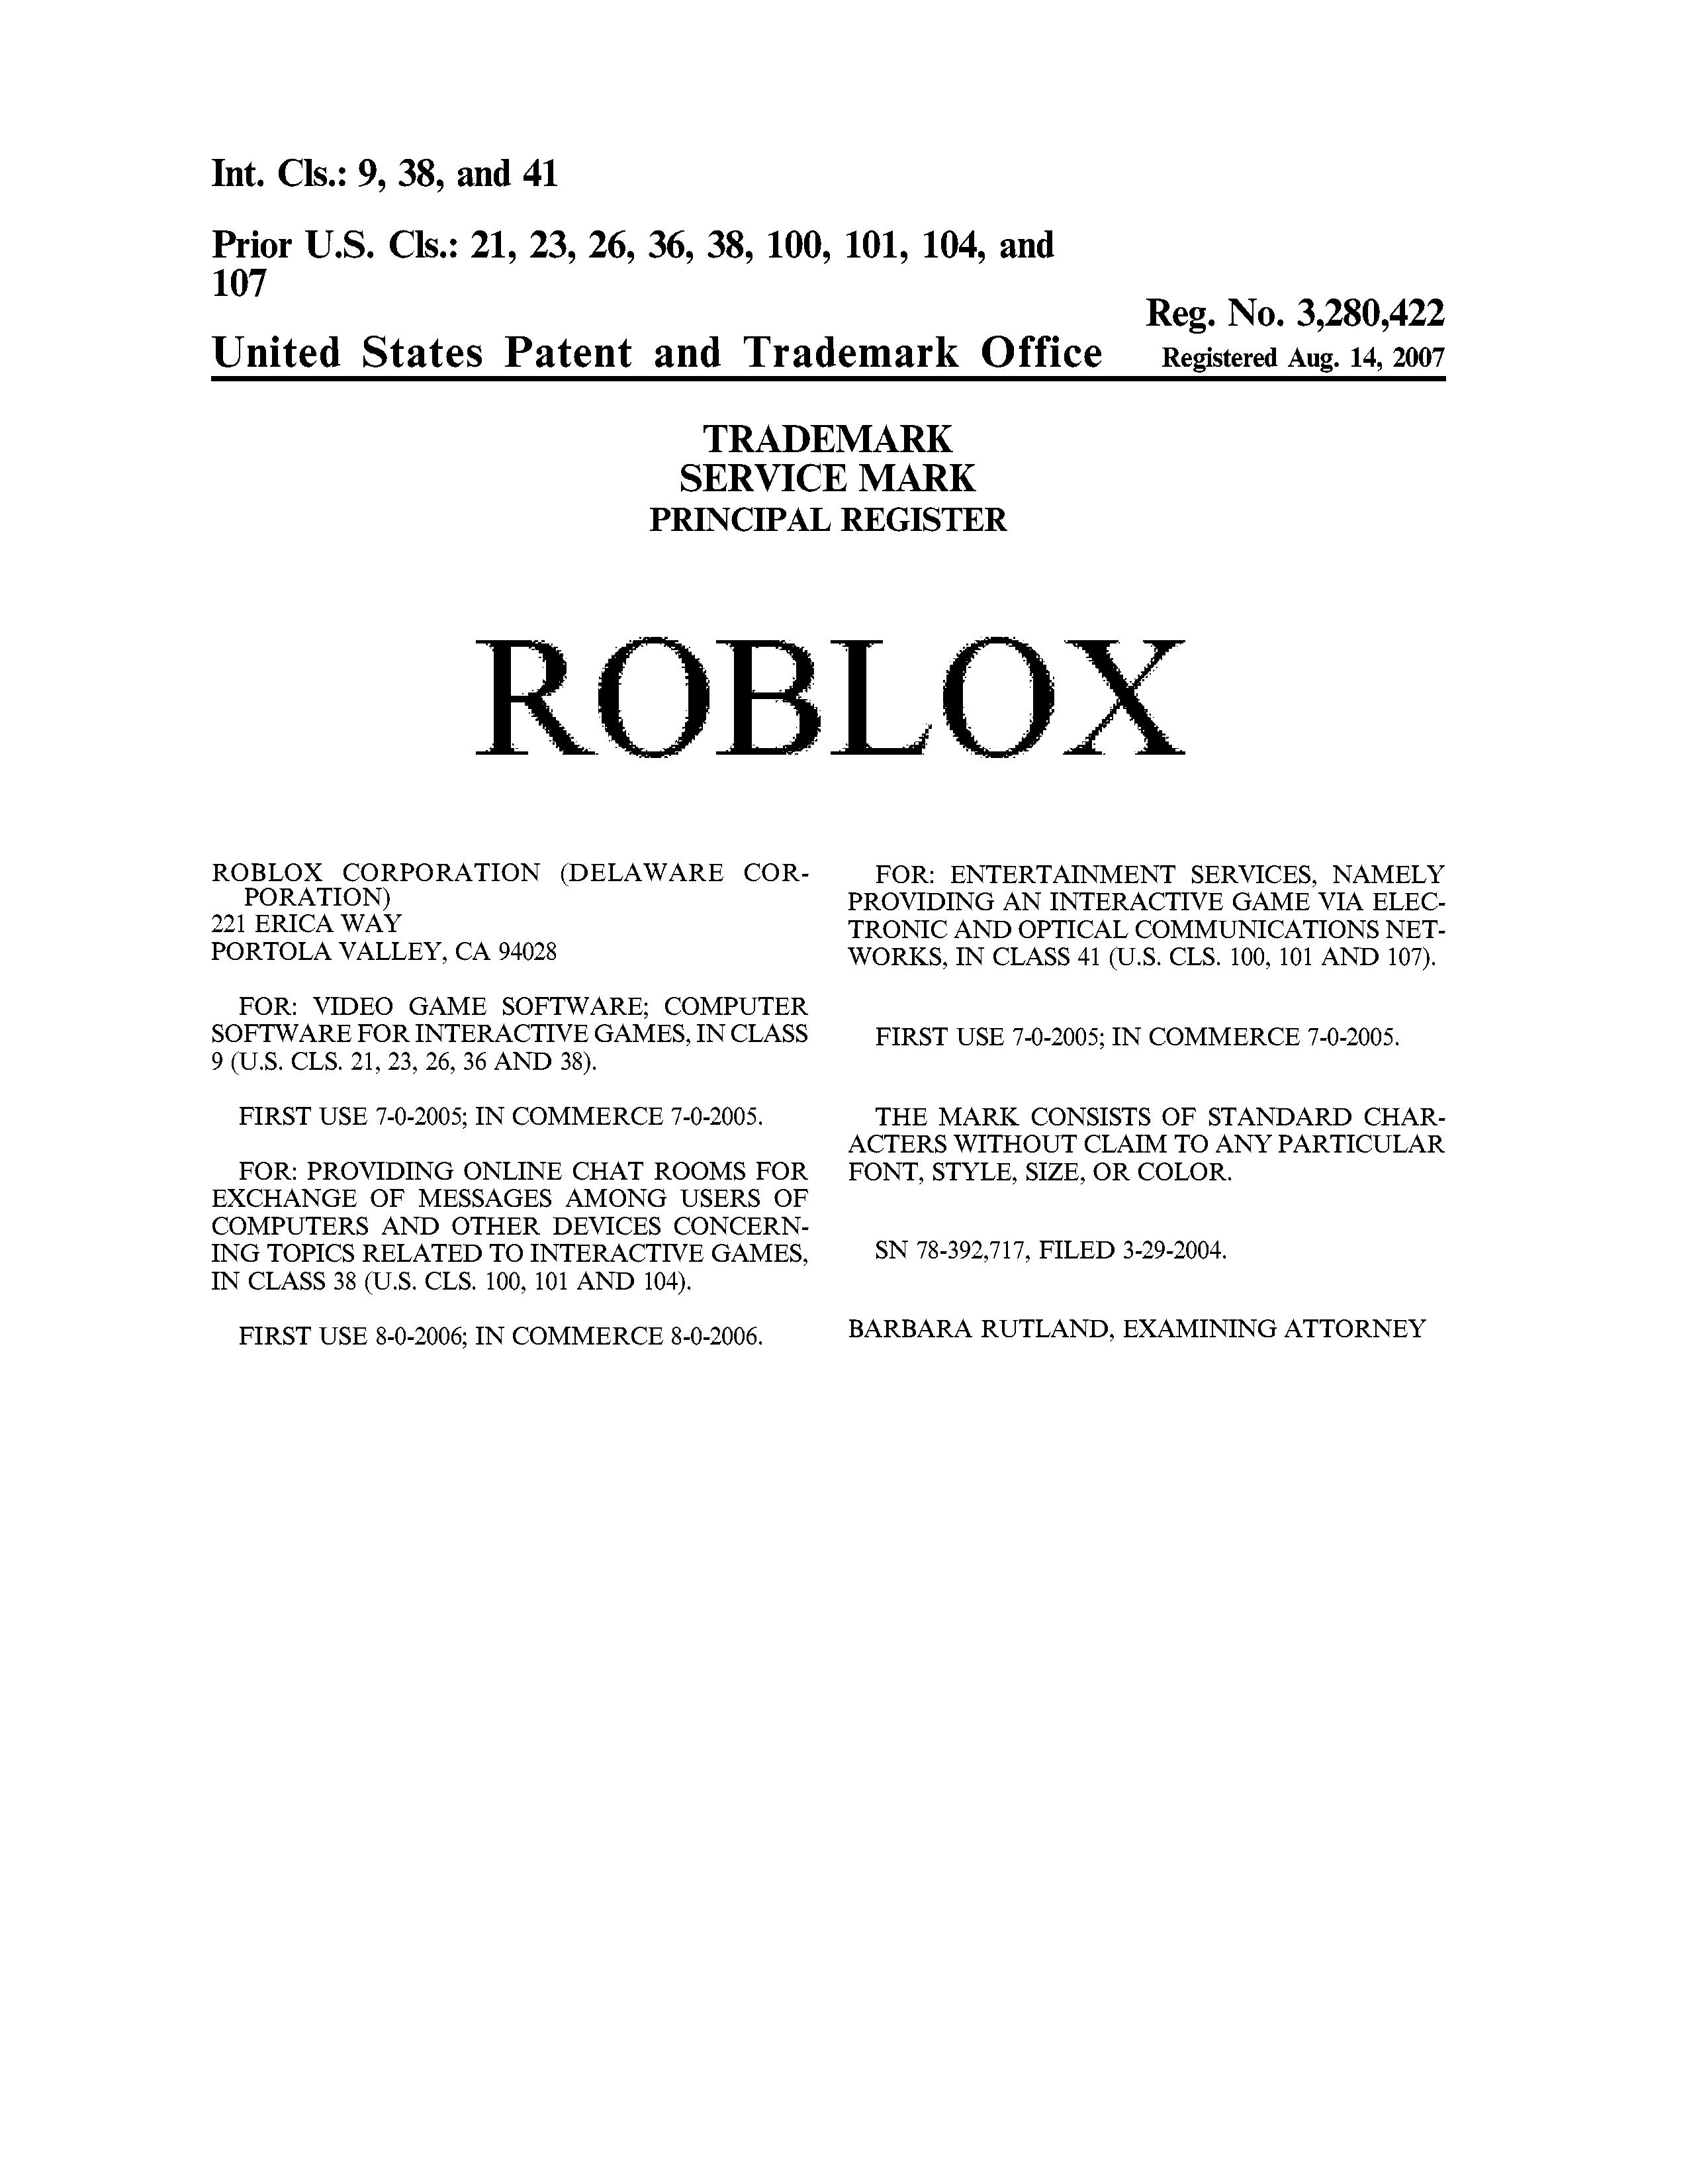 Roblox Details A Report By Trademark Bank Calendar Your Mark Monitor Similar Marks - roblox corporation ca